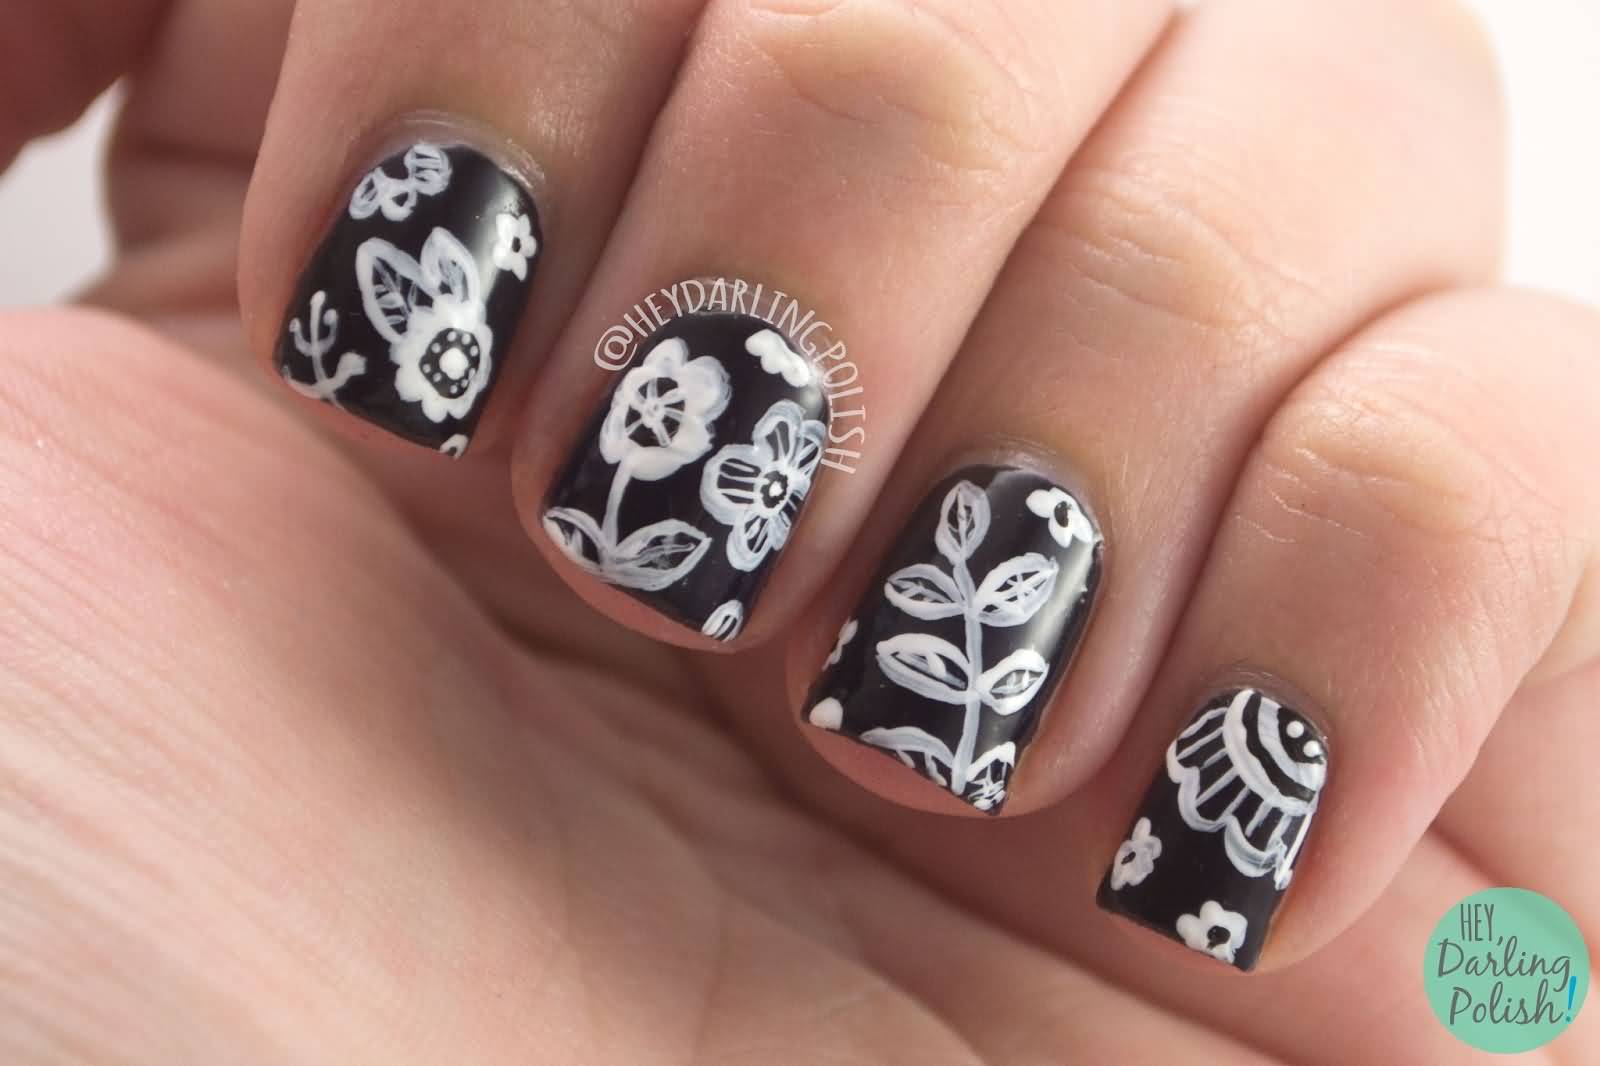 Black Nails With White Flowers Nail Art